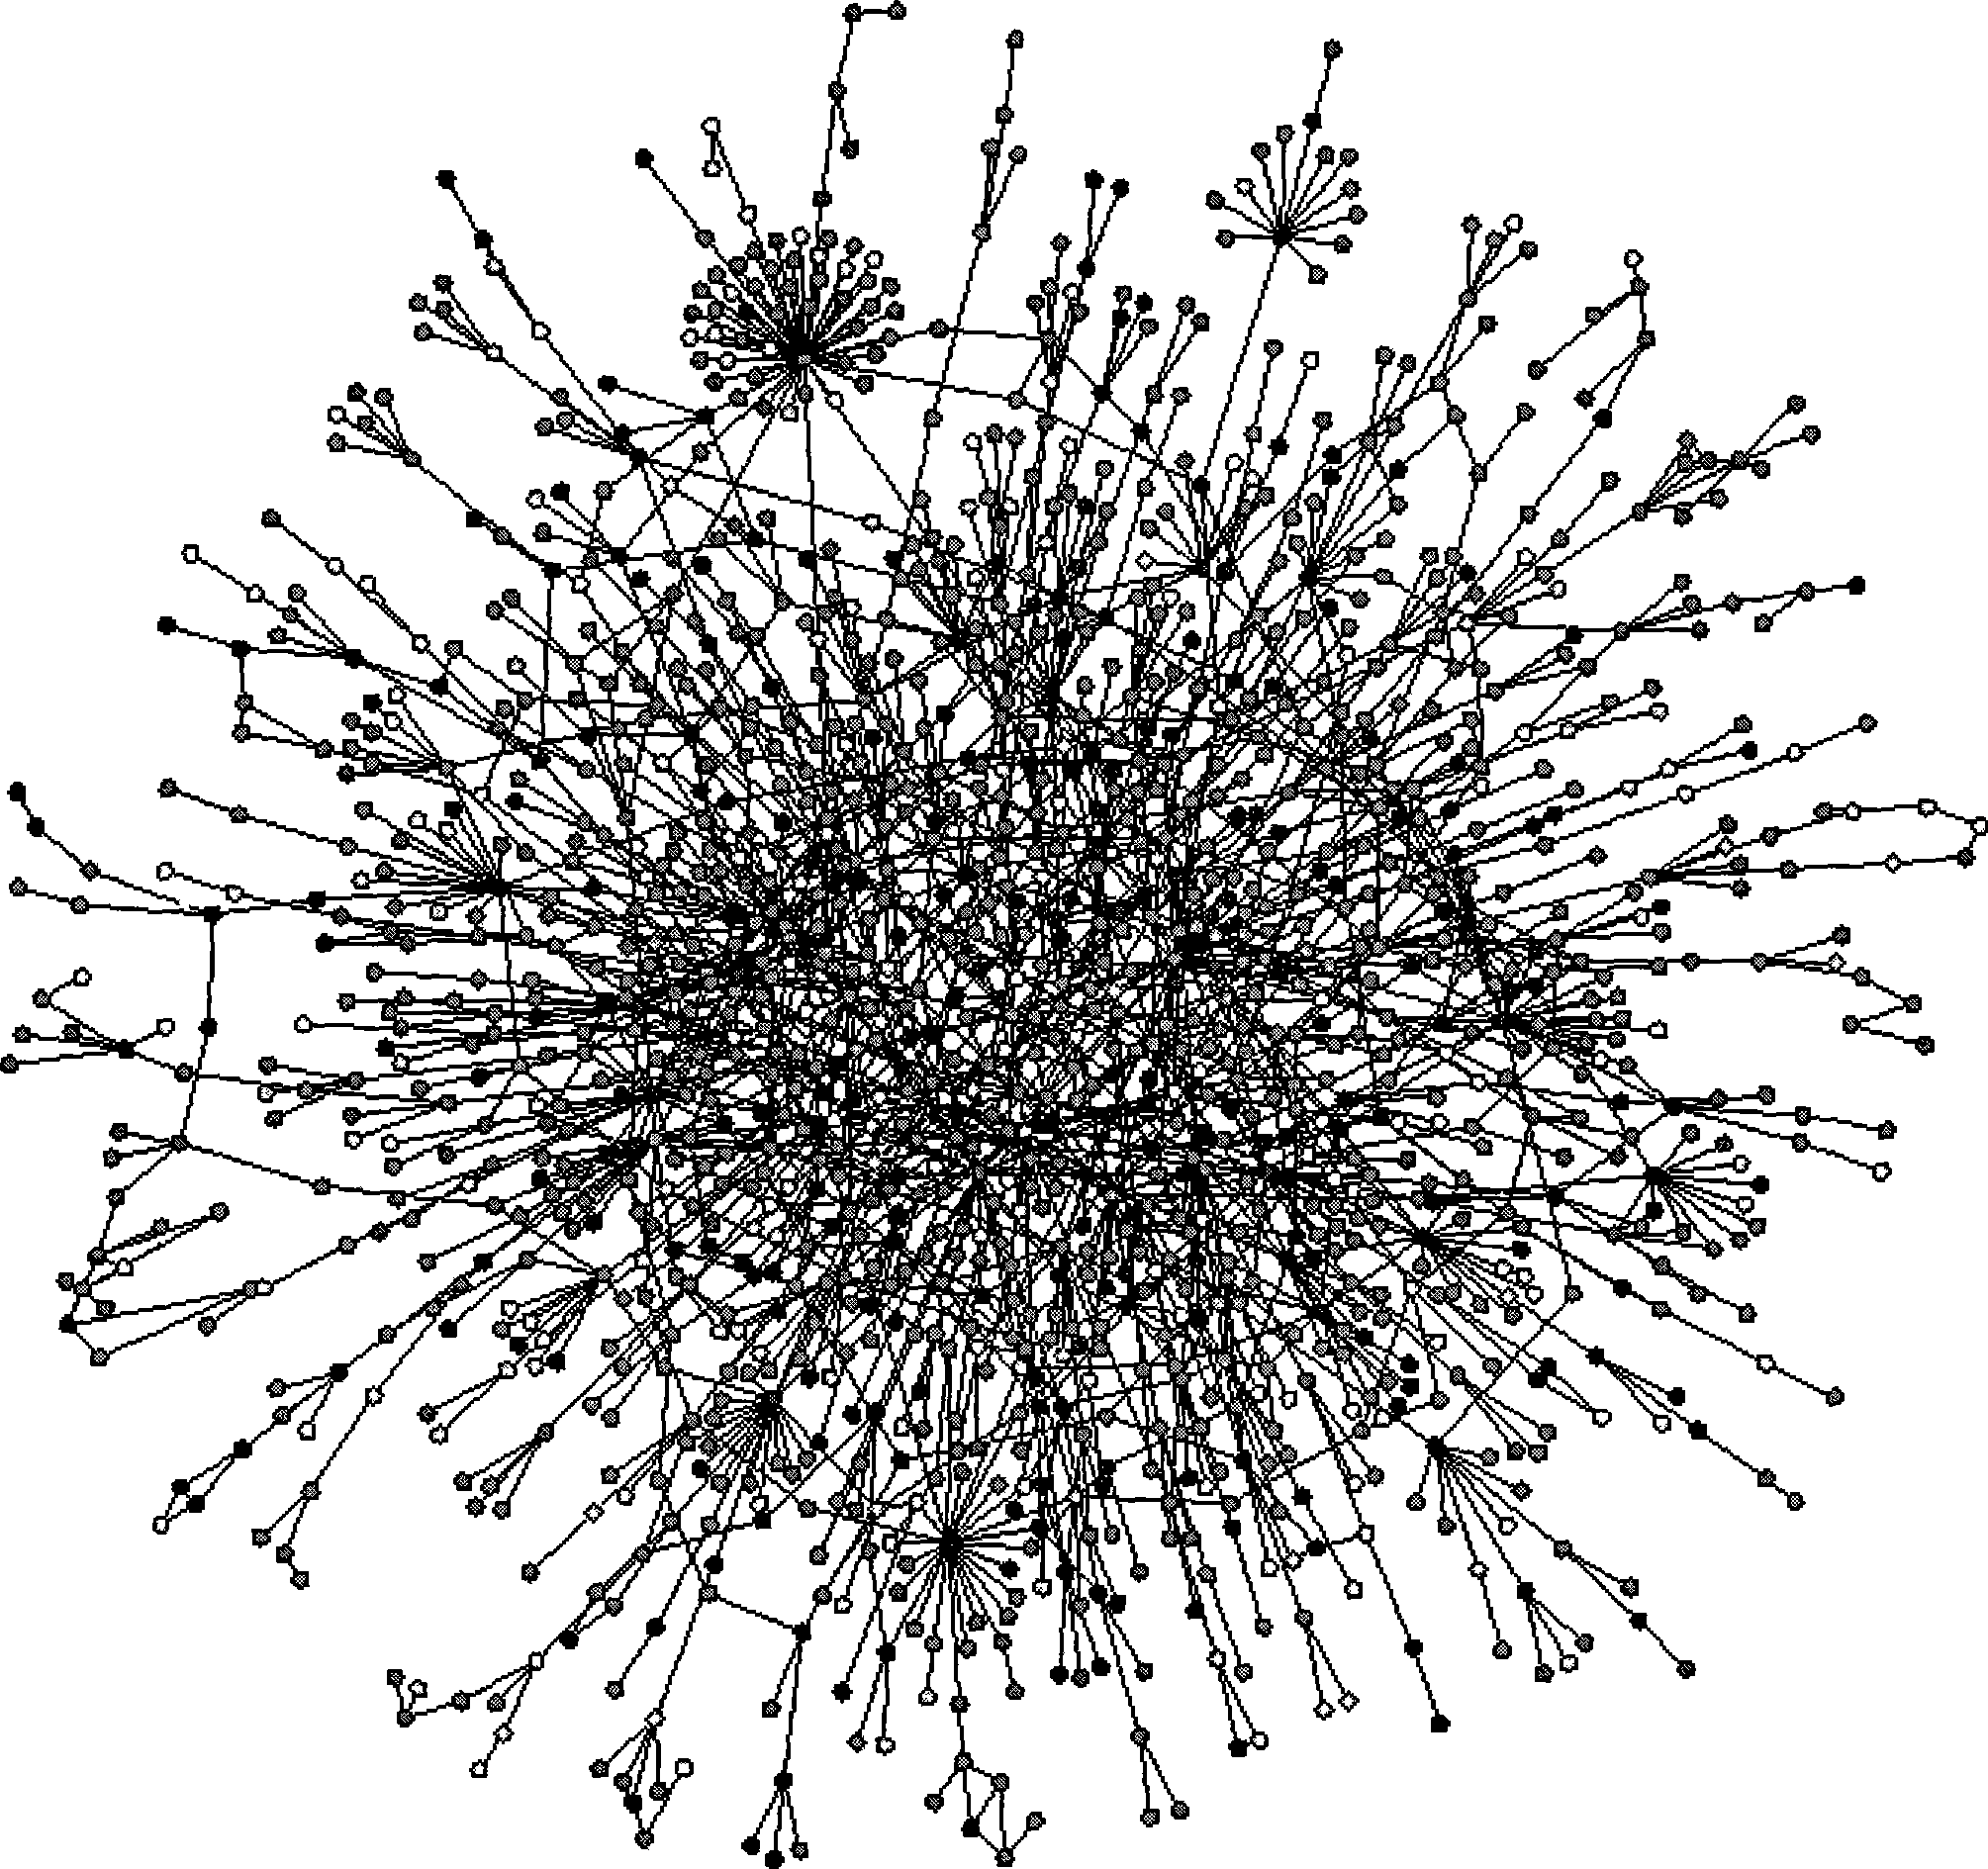 Community division method in complex network